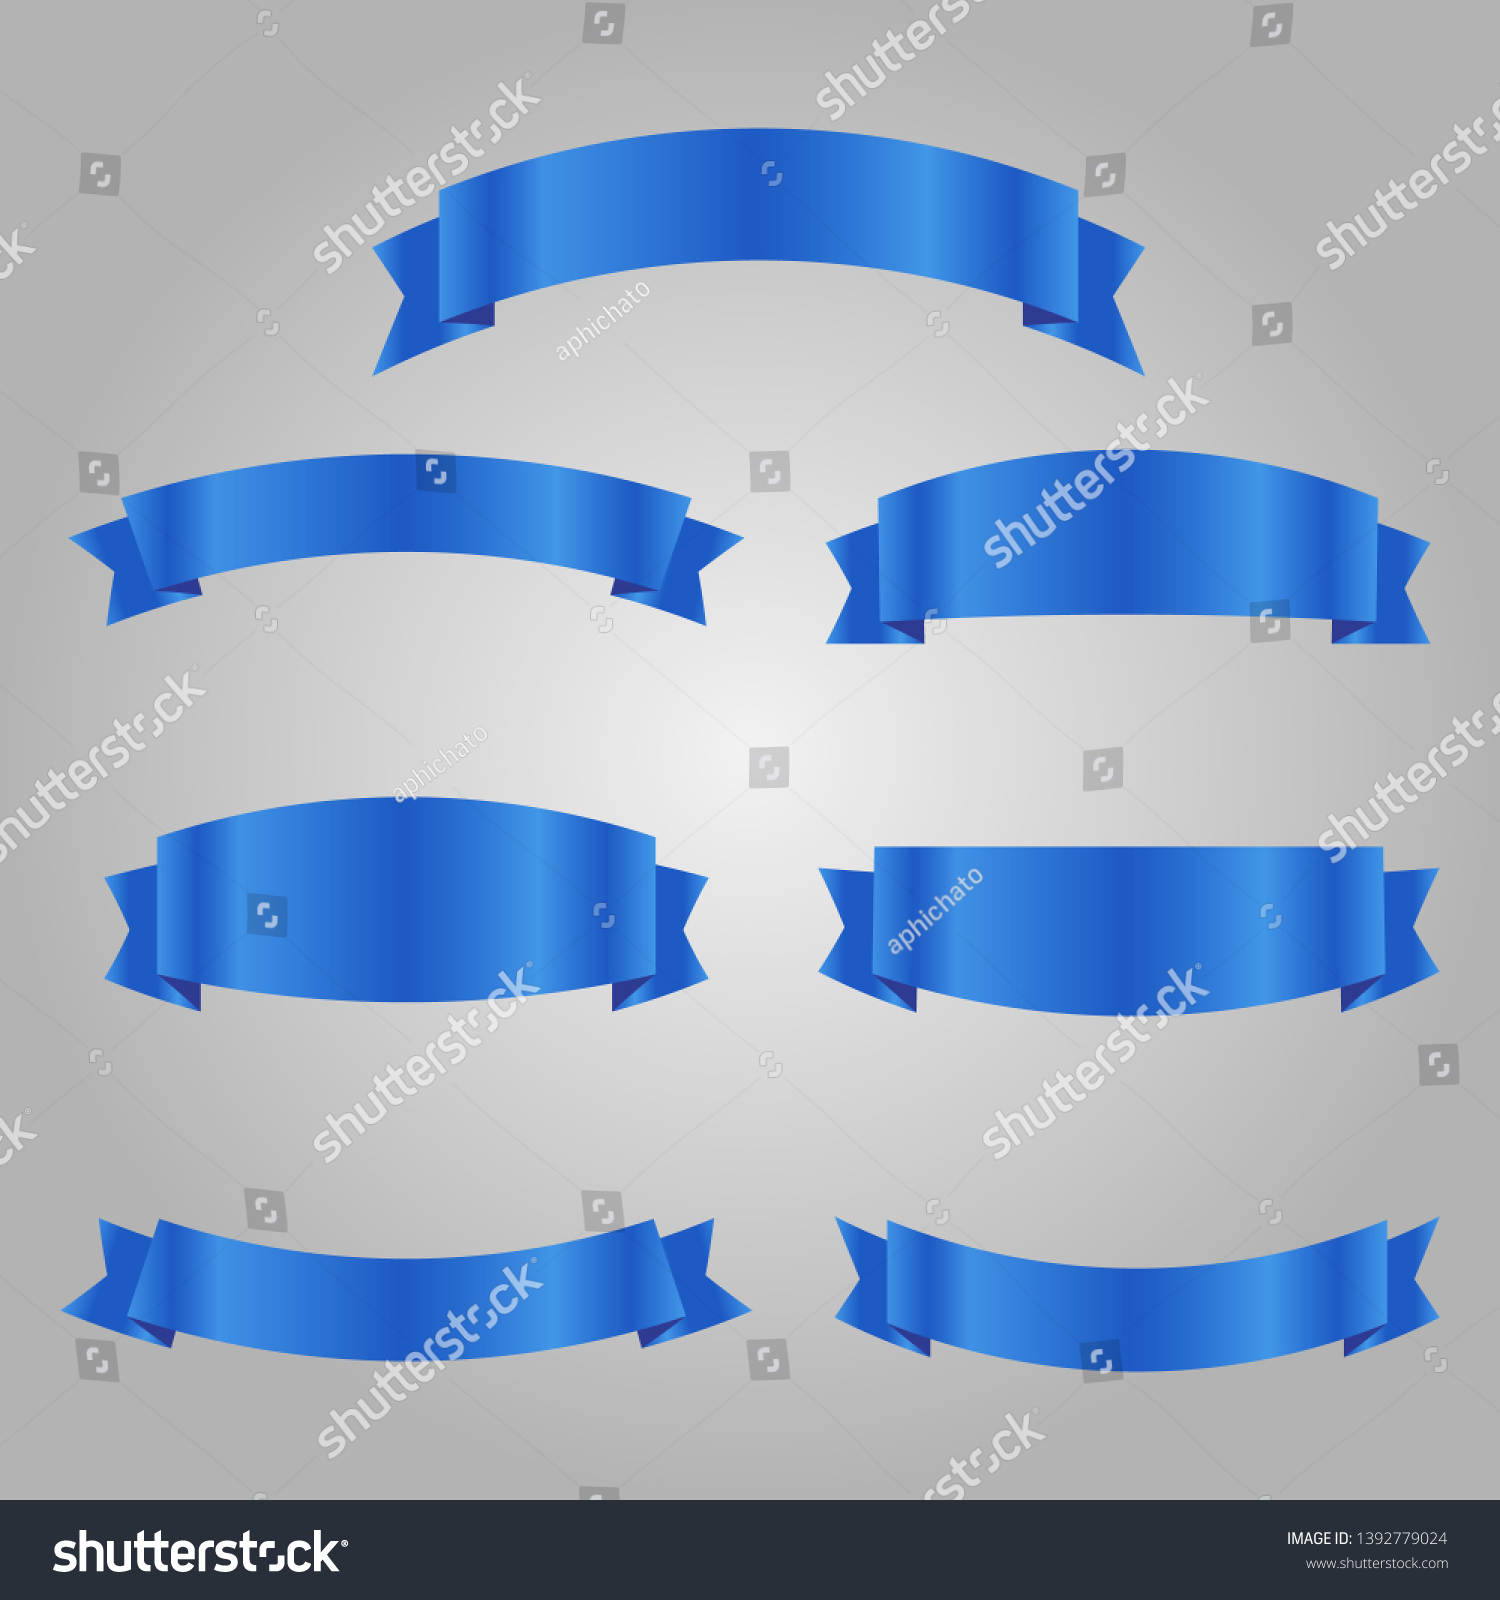 SVG of set of blue ribbon banner icon,blue Web Ribbons Set With Gradient Mesh on gray background,Vector illustration. Place for your text. Ribbons for business and design. Design elements svg